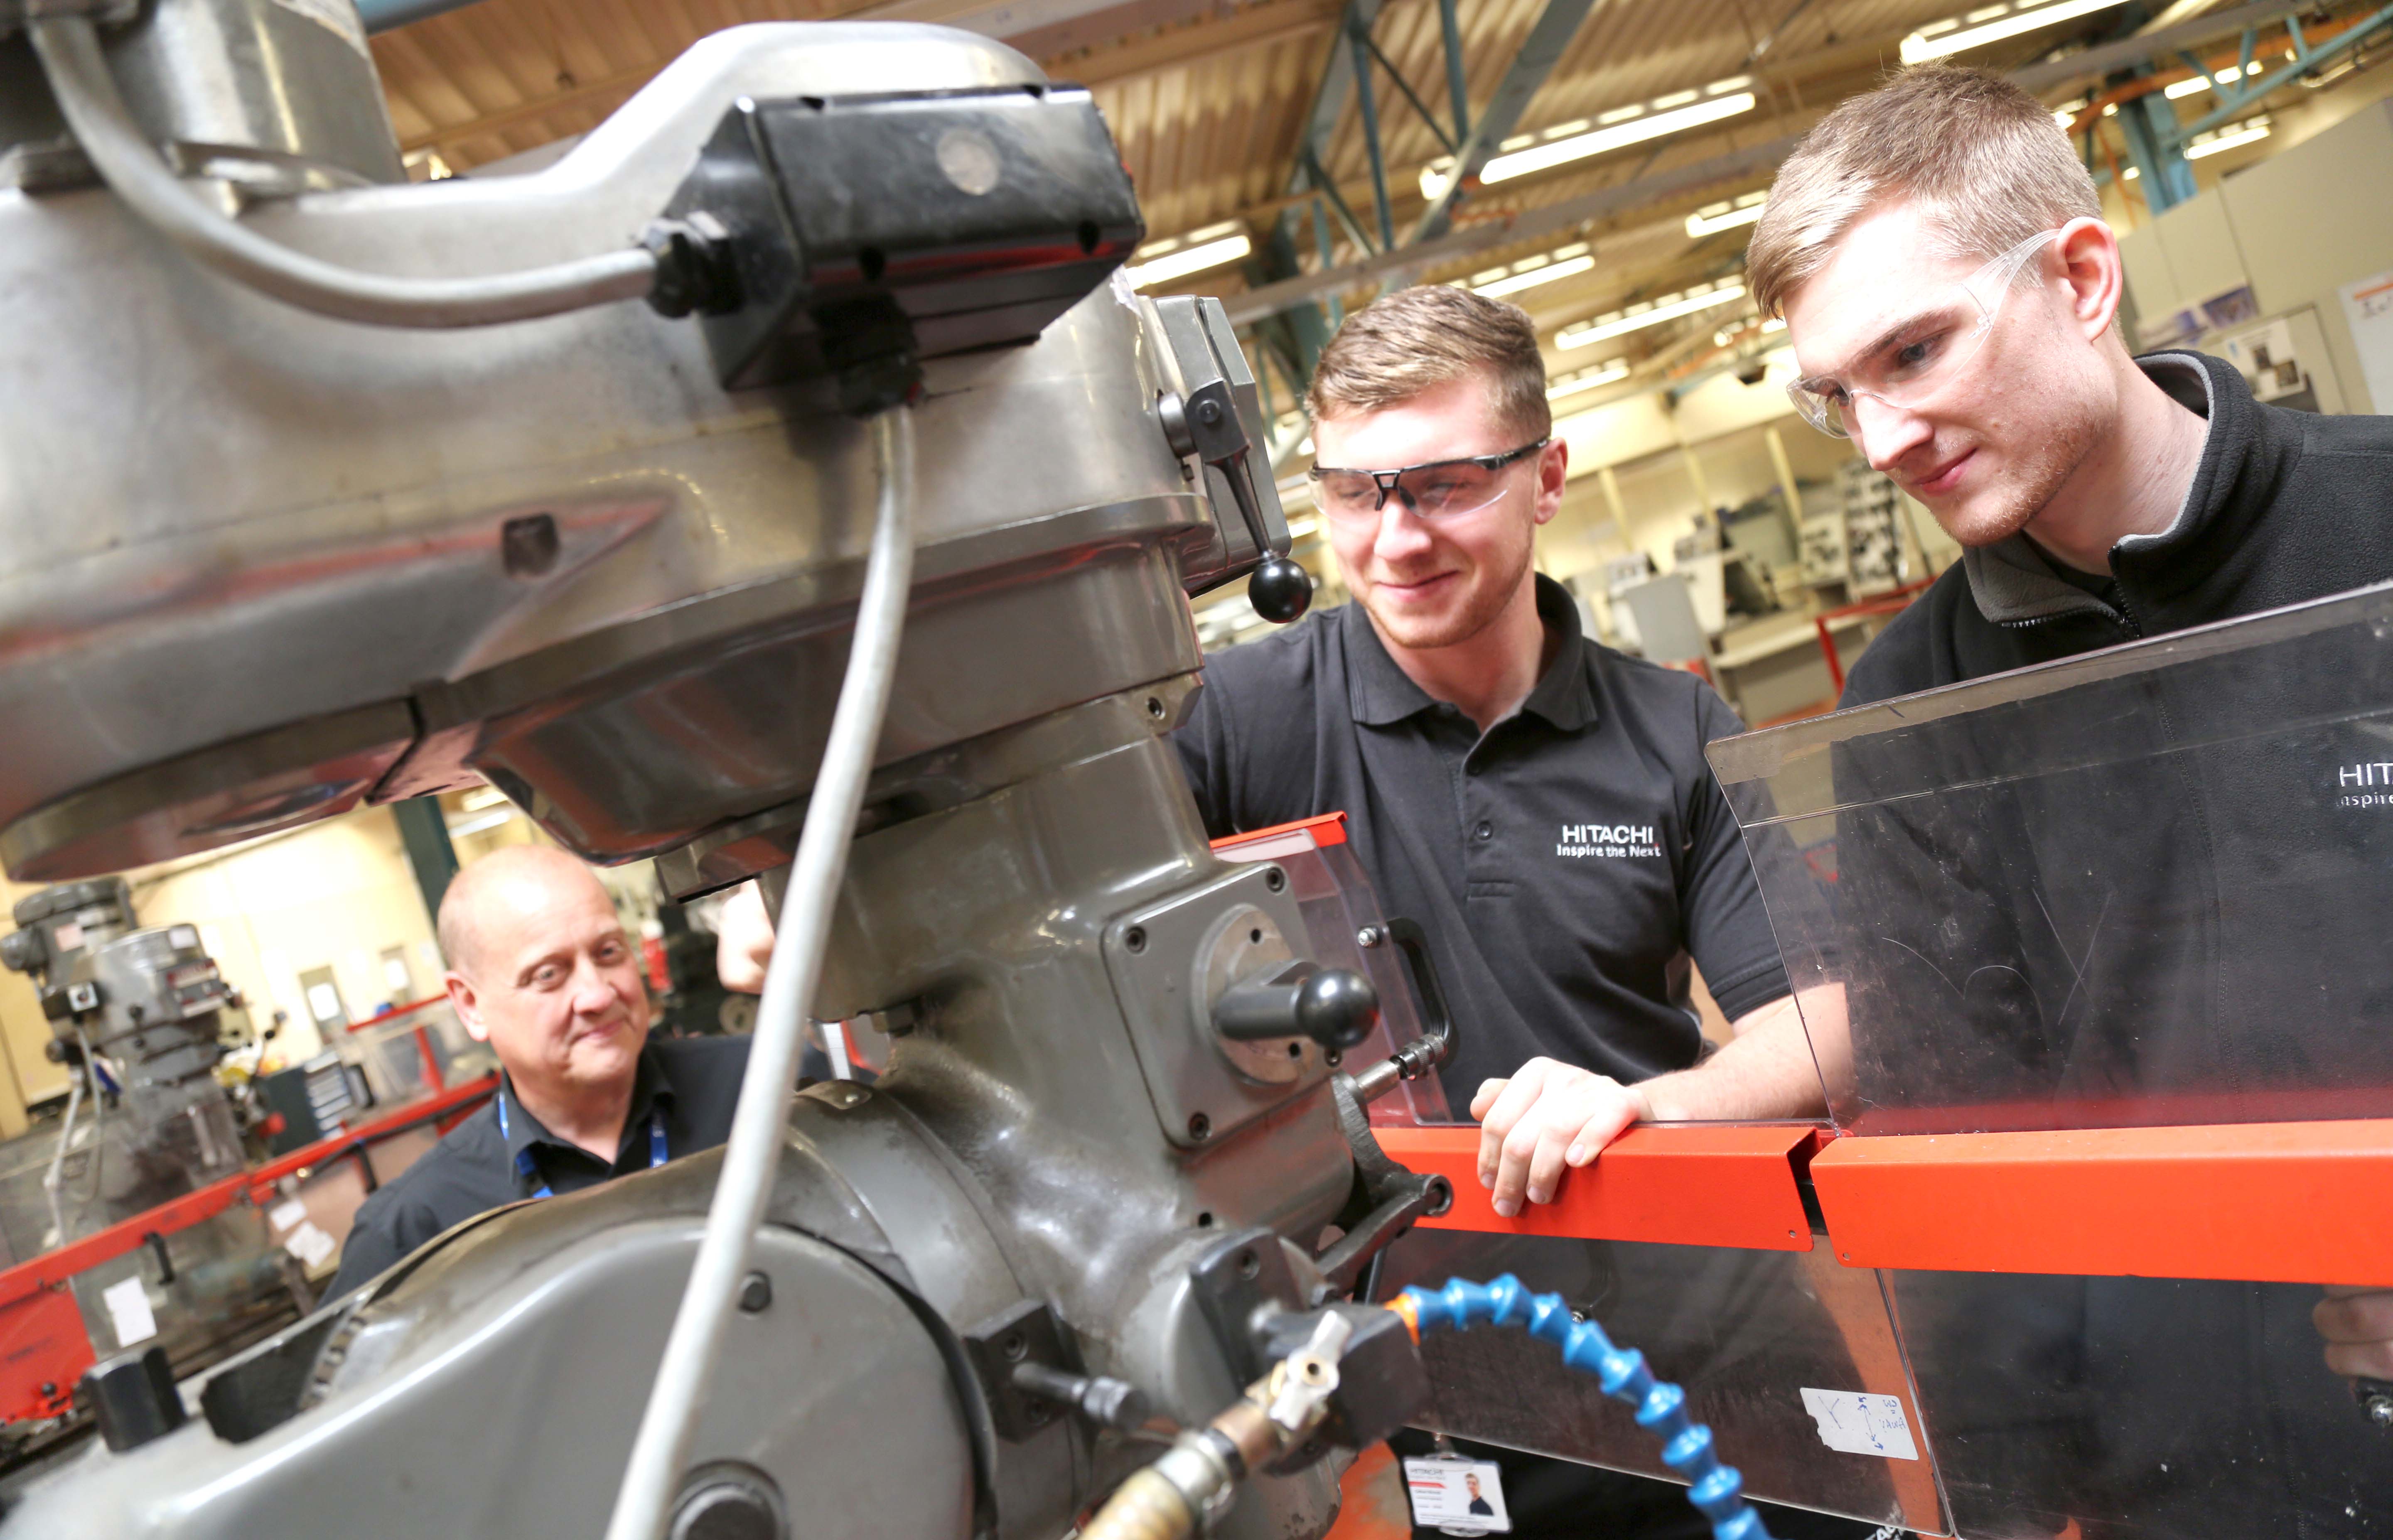 SWDT Apprentice Package Produces the Right Skills | Newton News